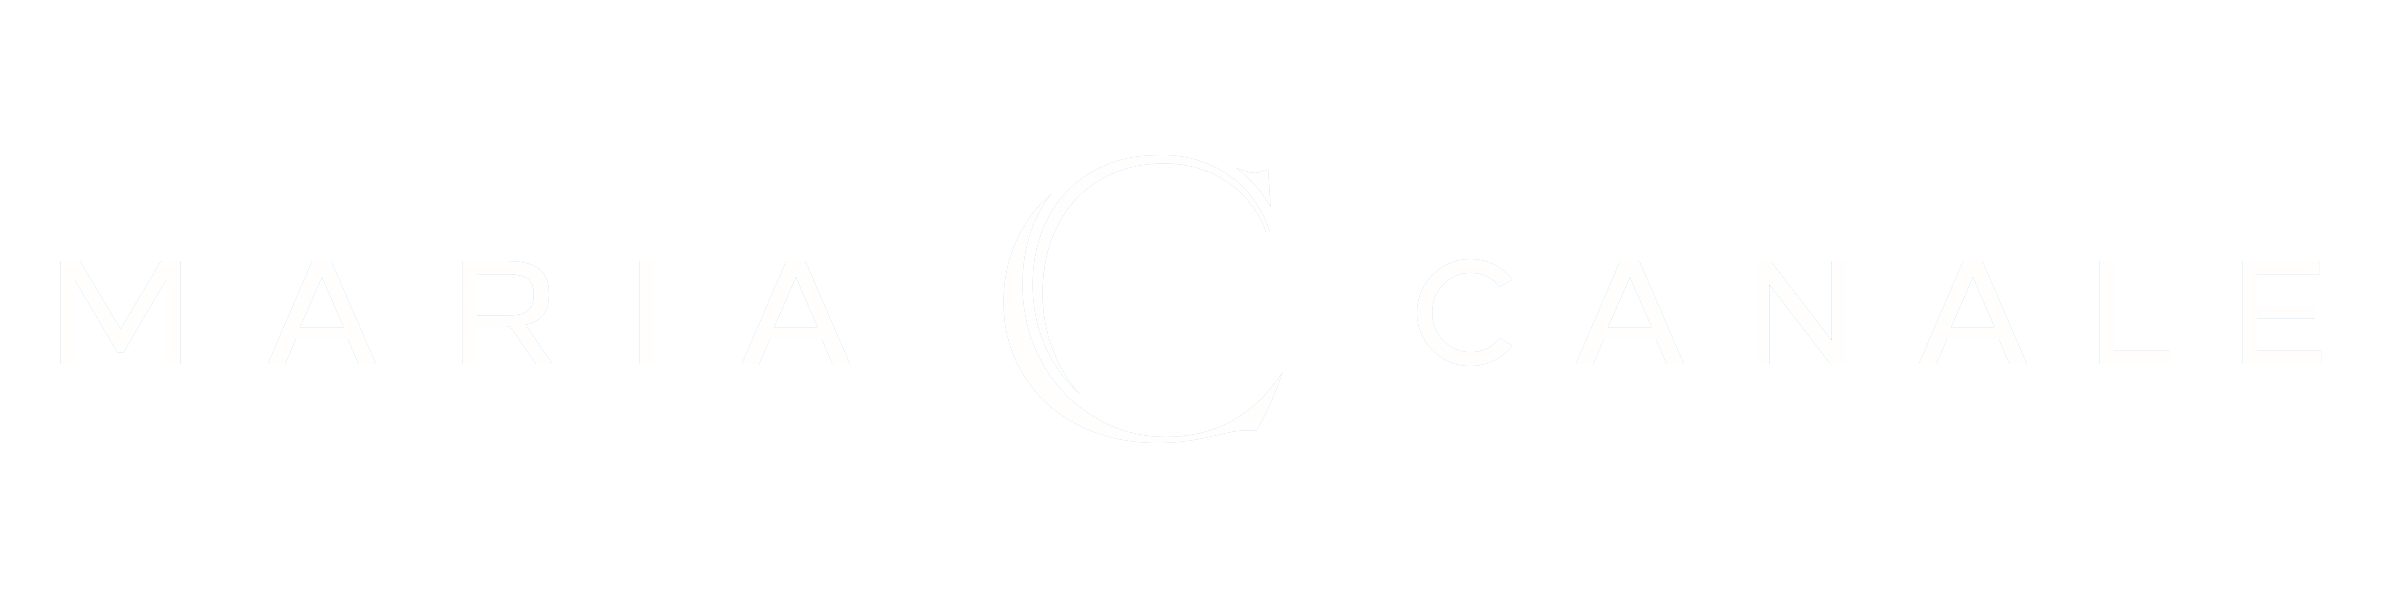 01_canale_horz_logo_3577_white.png